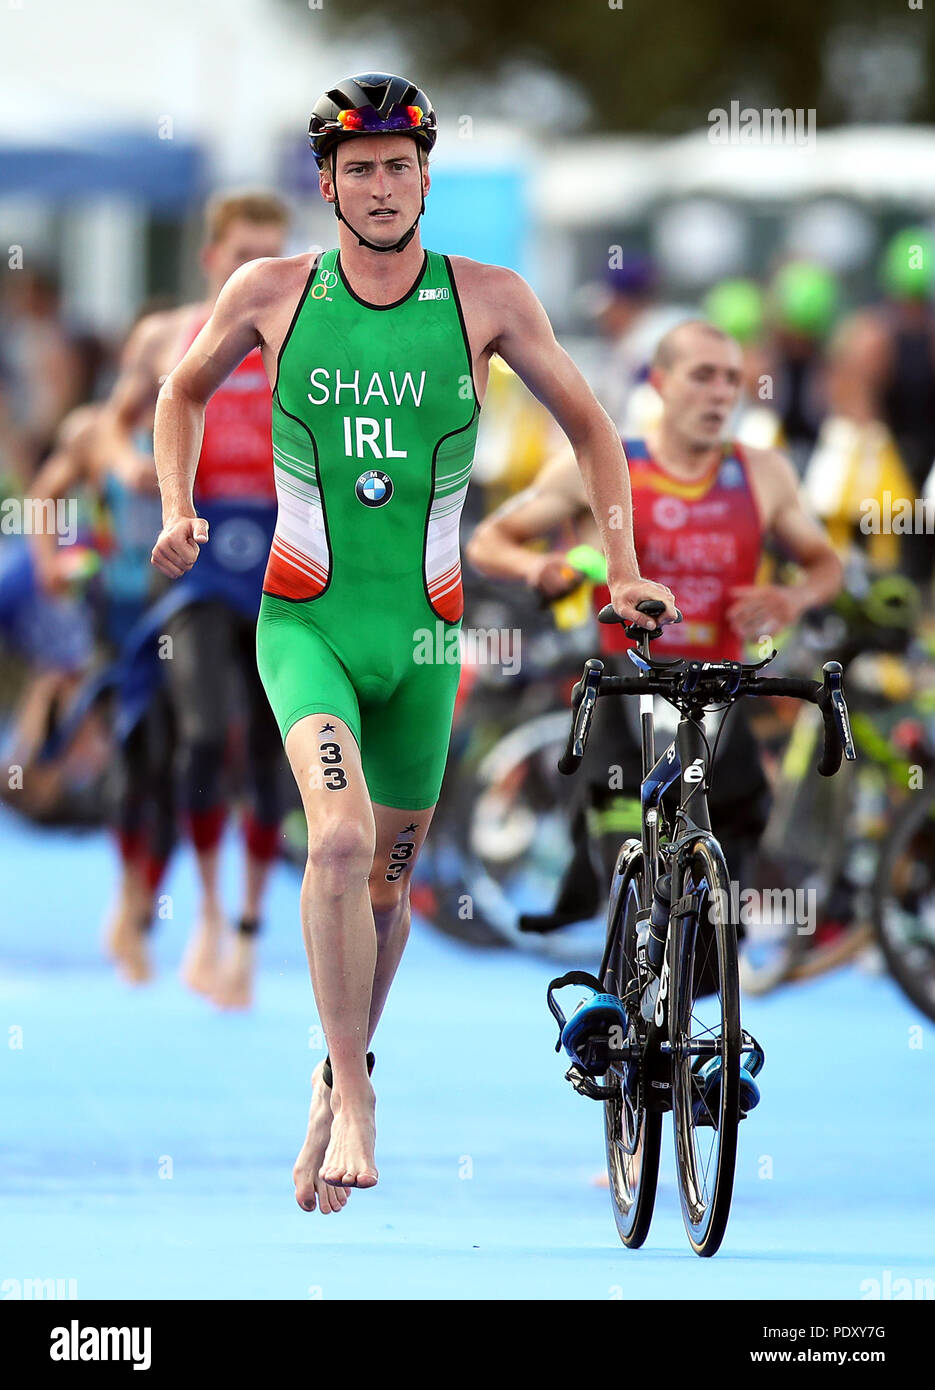 Ireland's Benjamin Shaw during the Men's Triathlon during day nine of the 2018 European Championships at Strathclyde Country Park, Lanarkshire. PRESS ASSOCIATION Photo. Picture date: Friday August 10, 2018. See PA story TRIATHLON European. Photo credit should read: John Walton/PA Wire. Stock Photo